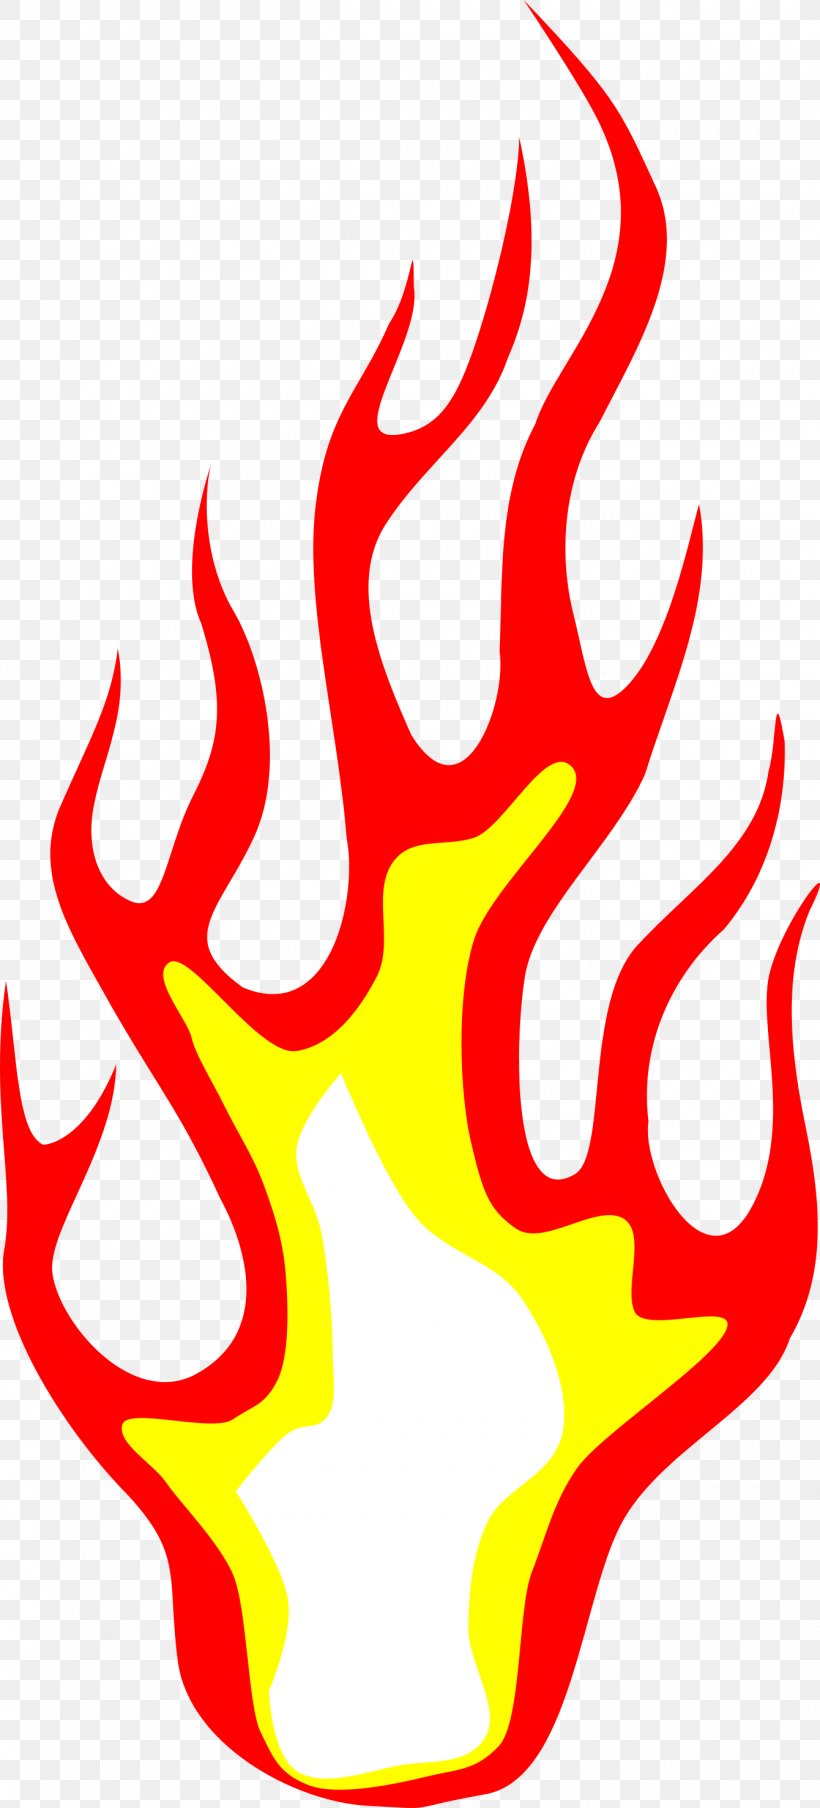 Clip Art Image, PNG, 1340x2955px, Flame, Red, Symbol Download Free